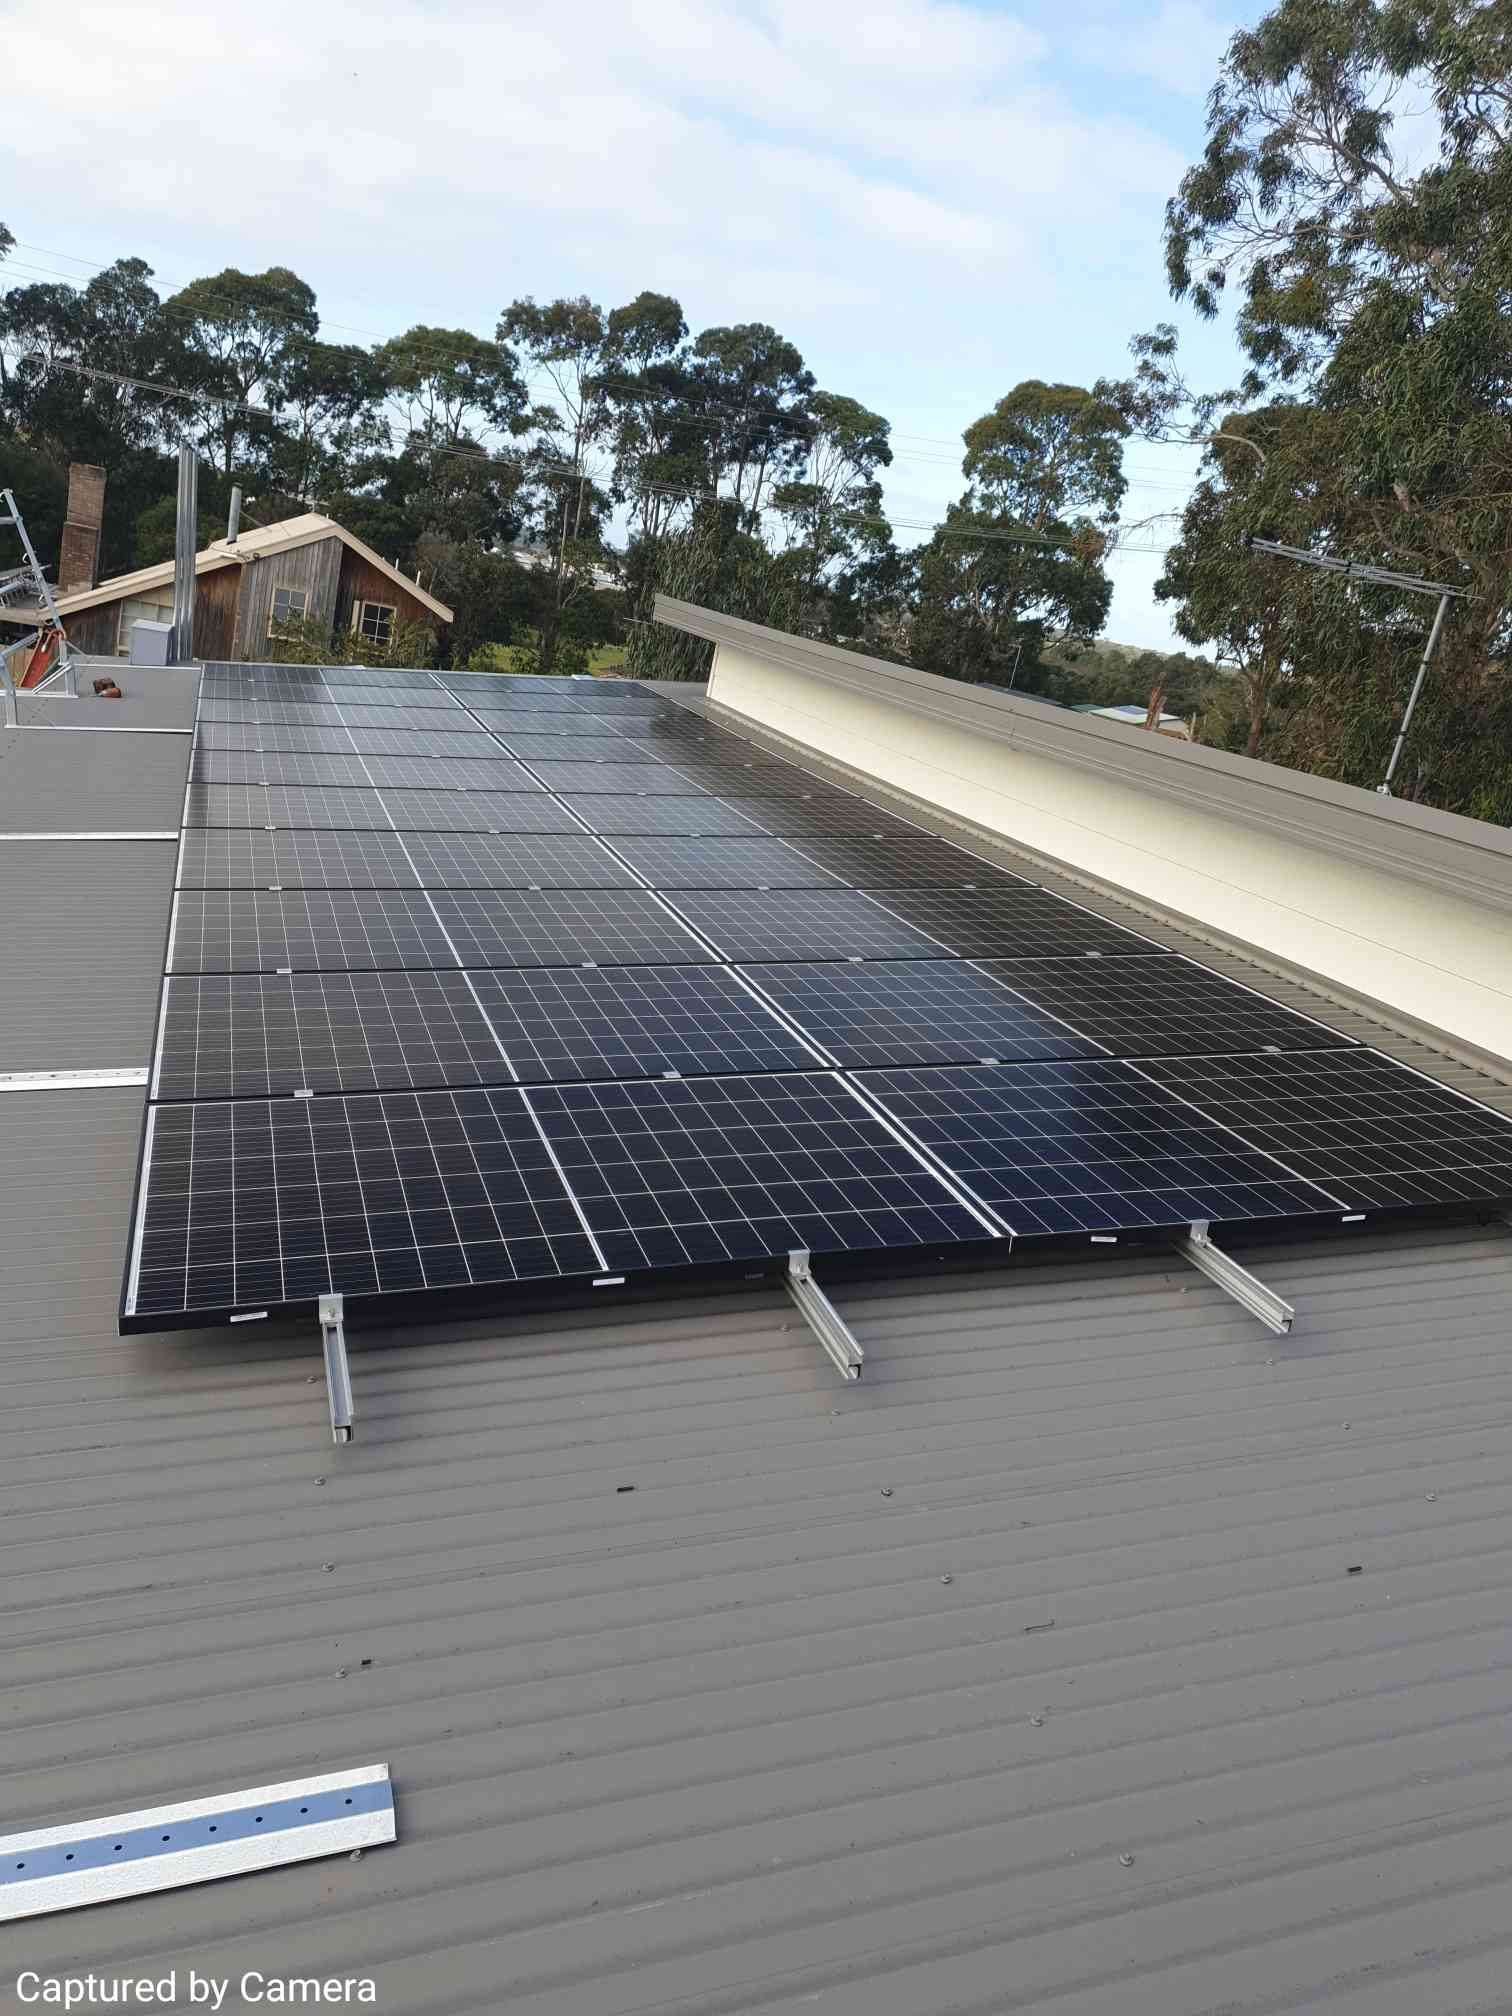 Without solar, one possible use of a powerwall would be to charge it (buy power) when the price of electricity is low—like early morning—and use power from it ( . Tesla Powerwall 2 Home Battery Phillip Island Case Study